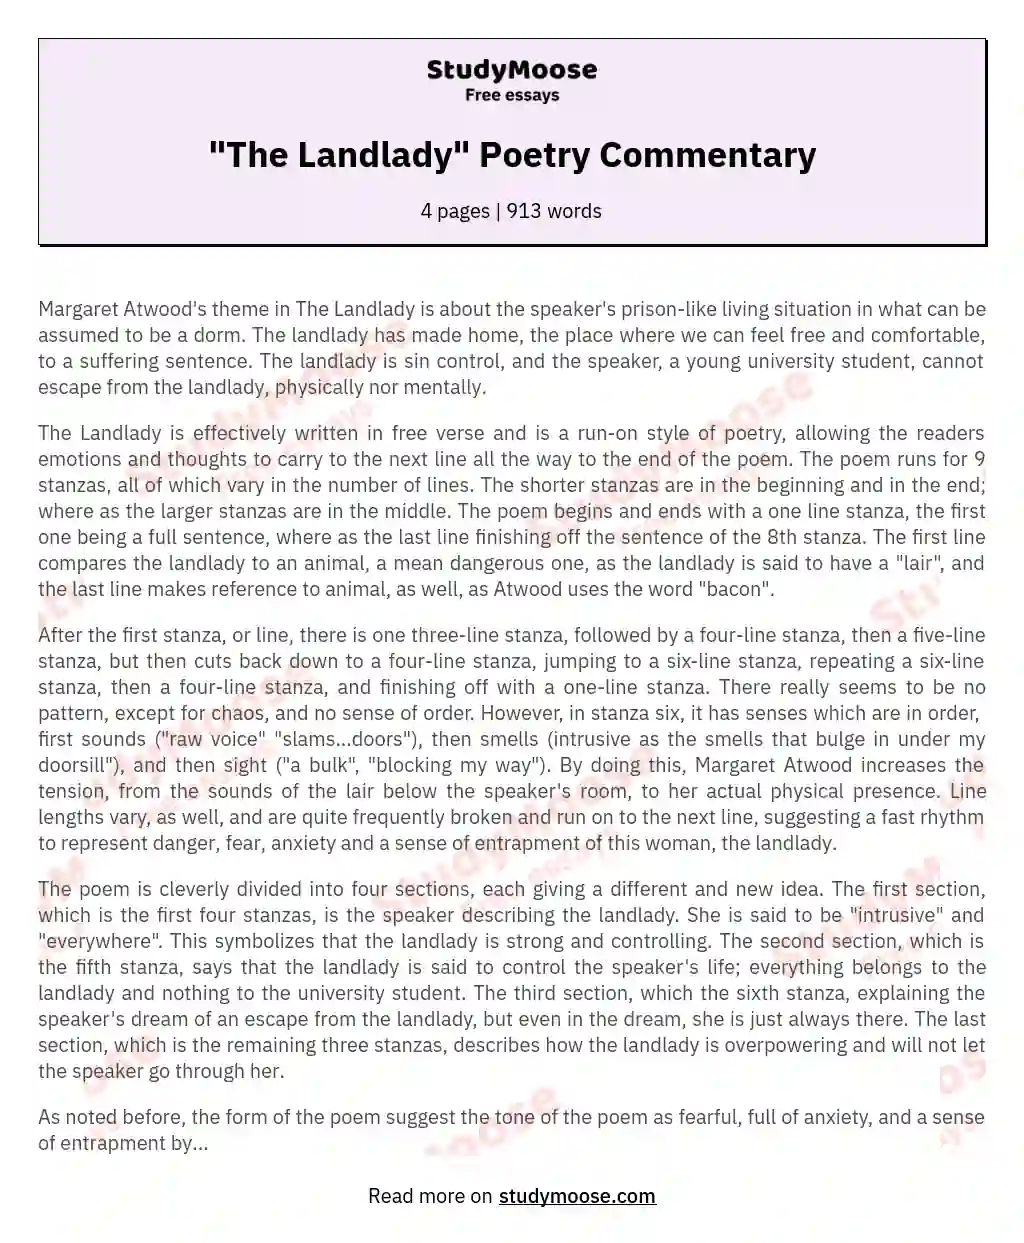 Analyzing Power and Control in Atwood's 'The Landlady' essay